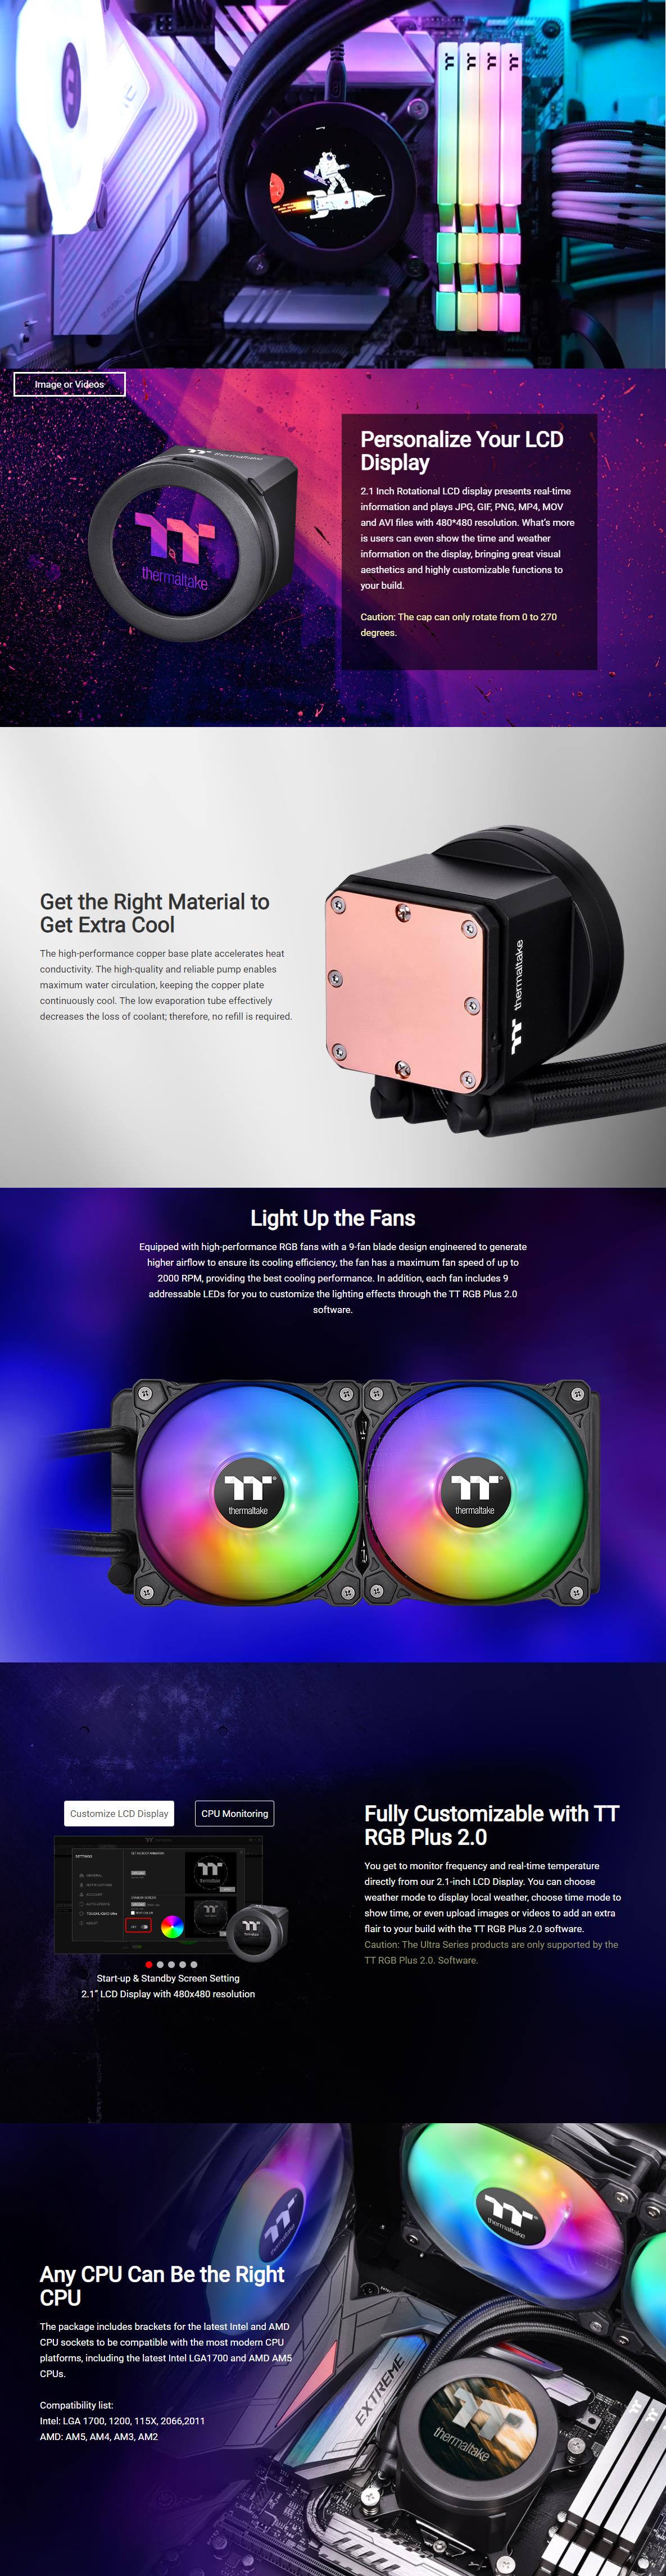 A large marketing image providing additional information about the product Thermaltake Floe Ultra RGB 240 - 240mm AIO Liquid CPU Cooler with LCD Display - Additional alt info not provided